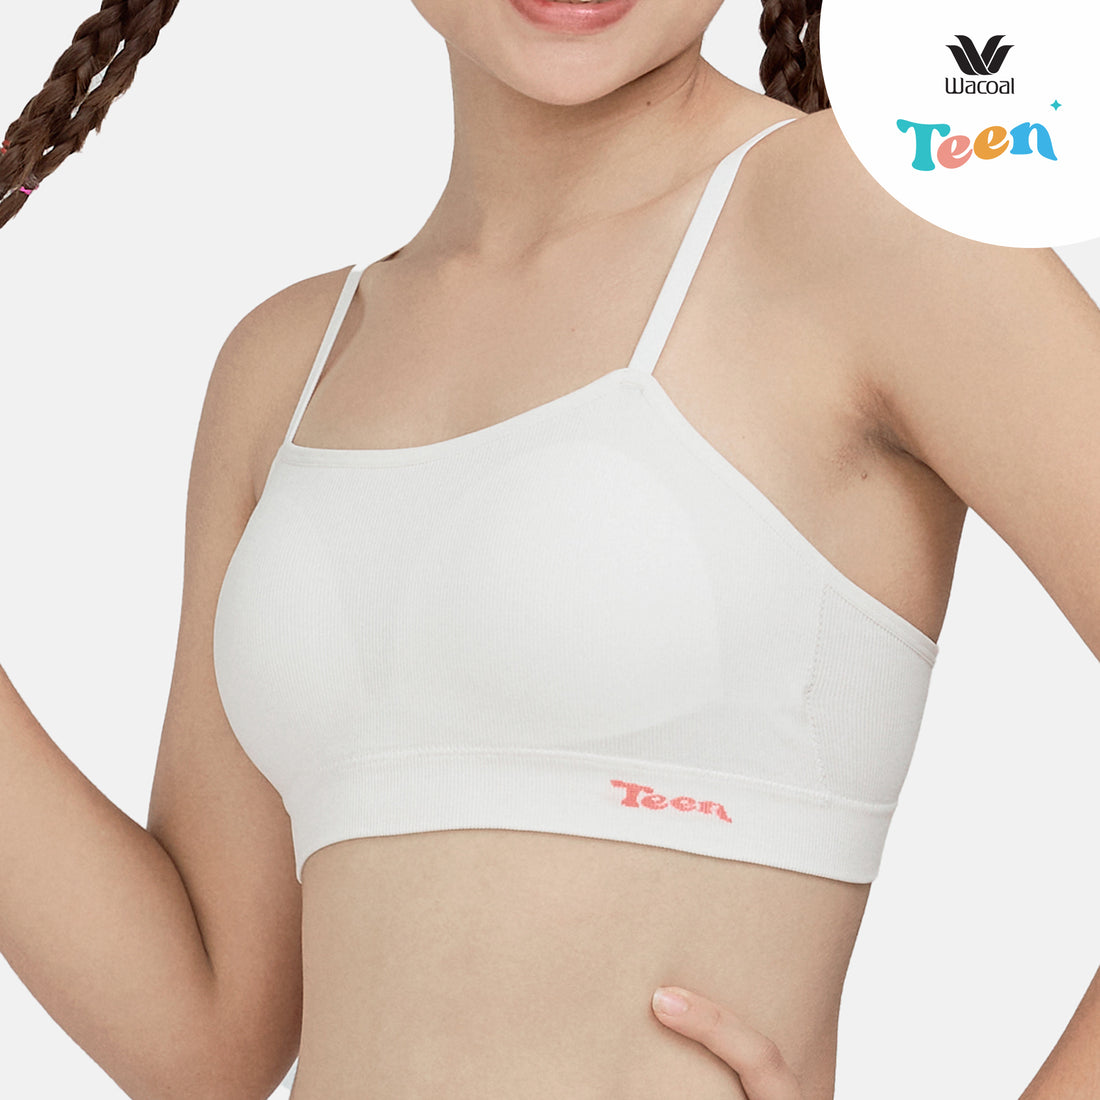 Wacoal Teen underwear for teenagers, wireless bra, strapless style, model WBT109 (paired with MUT108), cream color (CR)